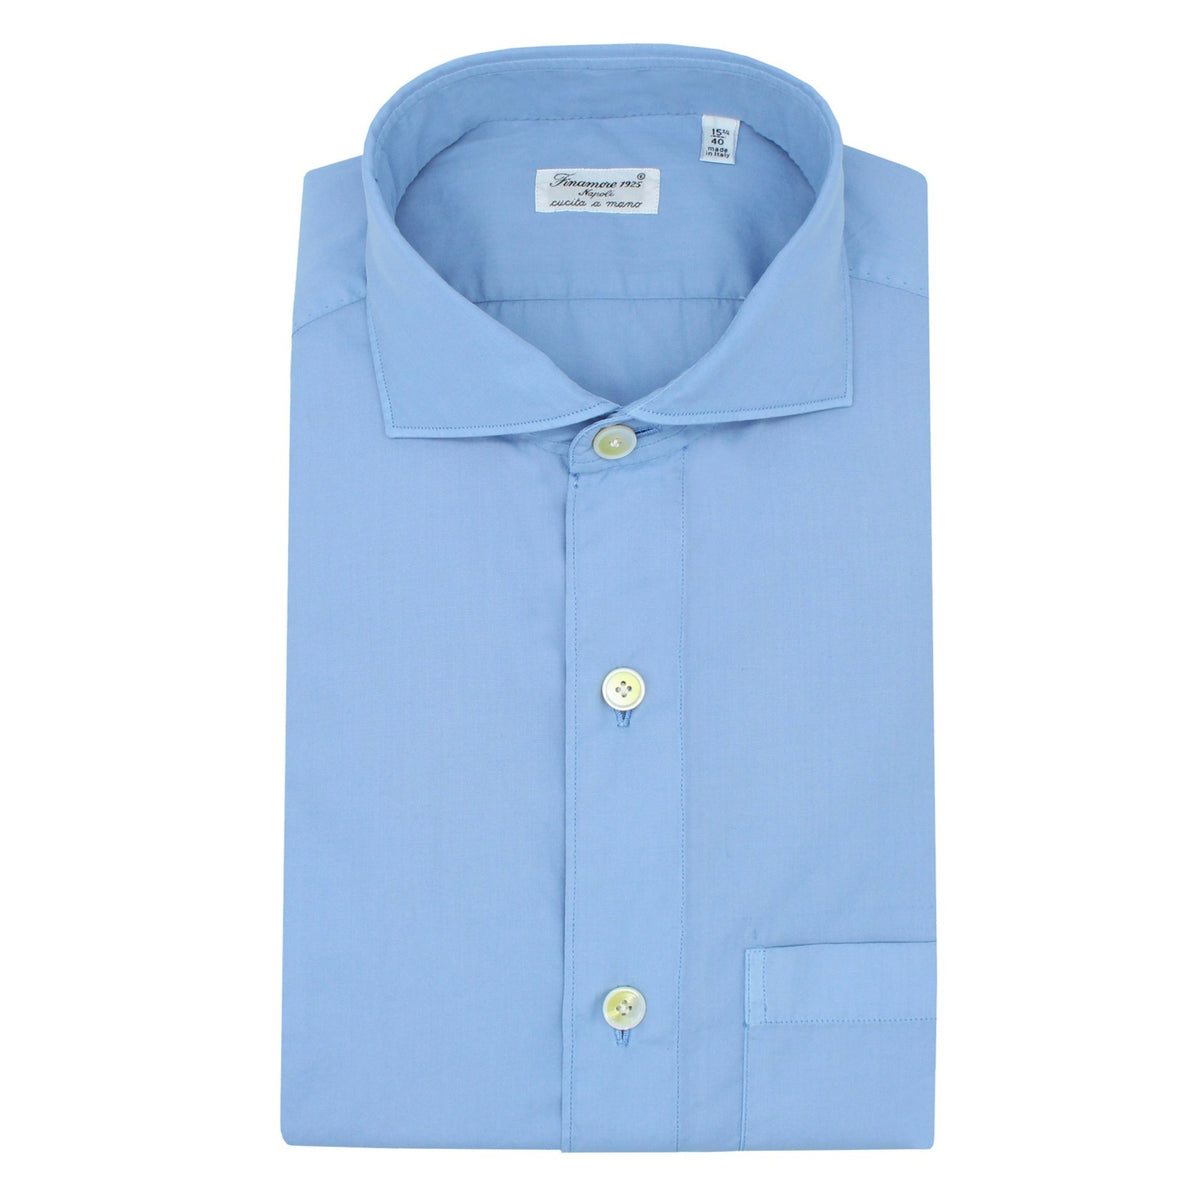 Classic Milano slim fit shirt in light blue cotton with pocket